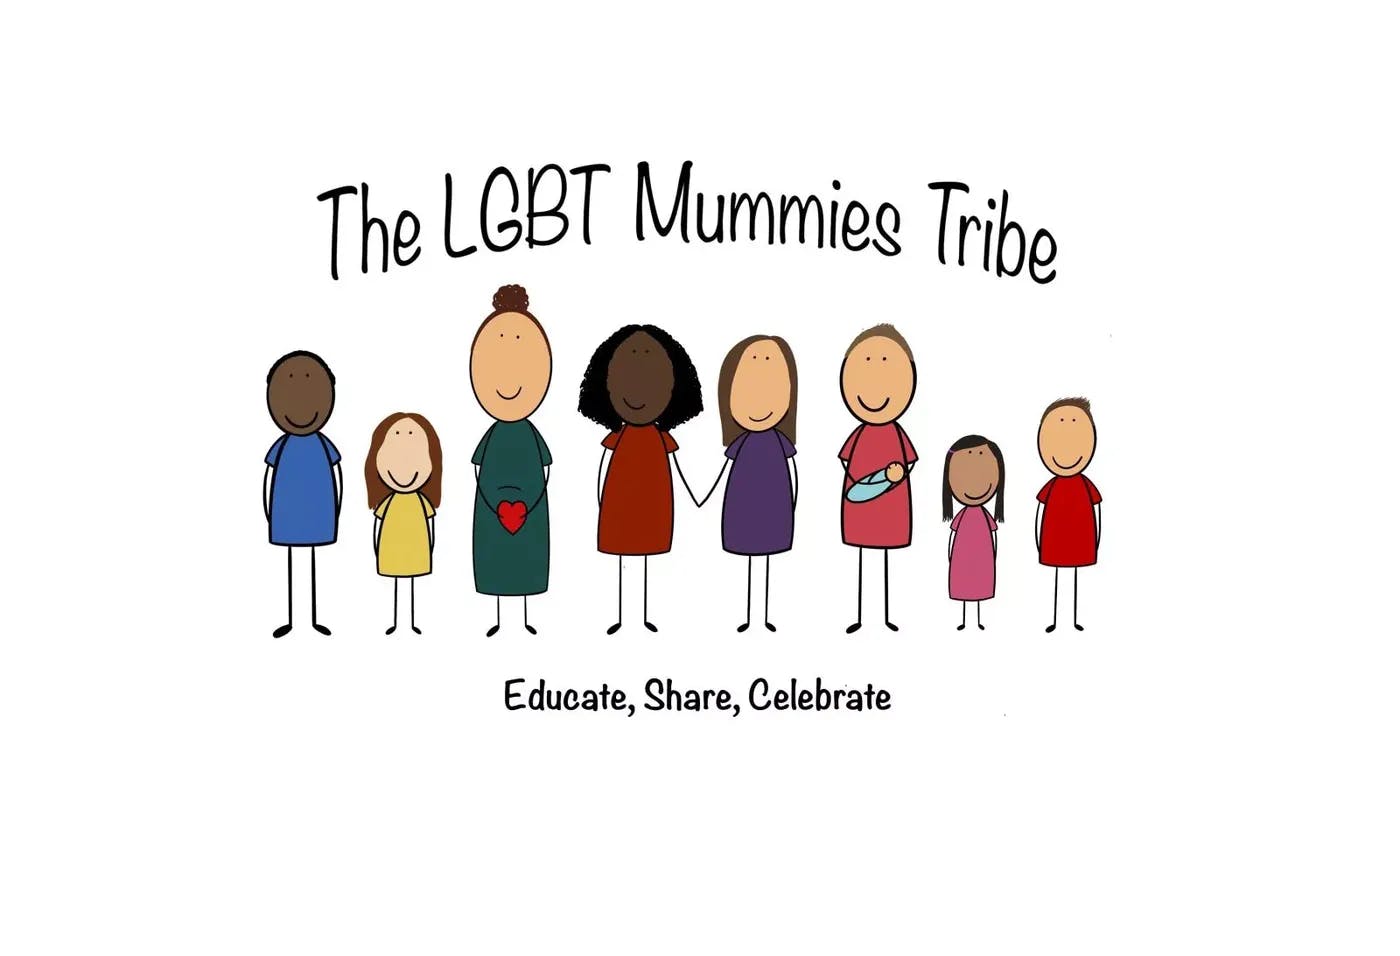 TFP teams up with the LGBT Mummies tribe